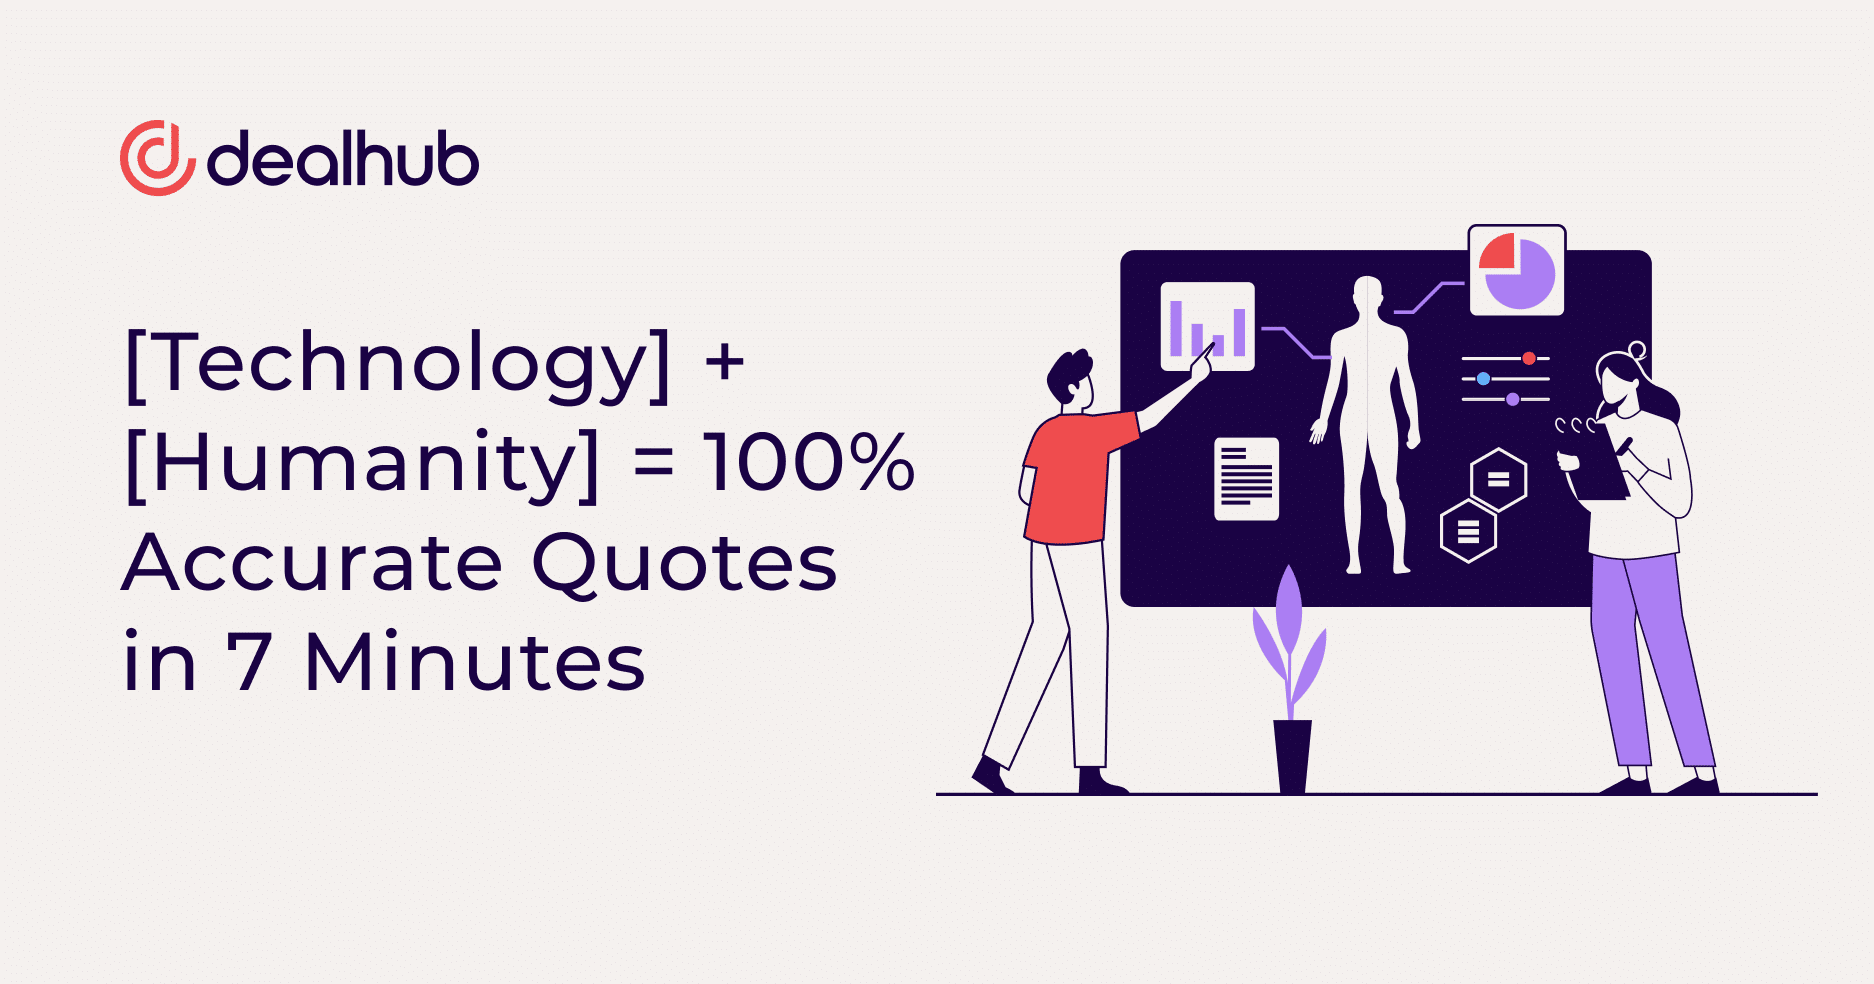 [Technology] + [Humanity] = 100% Accurate Quotes in 7 Minutes